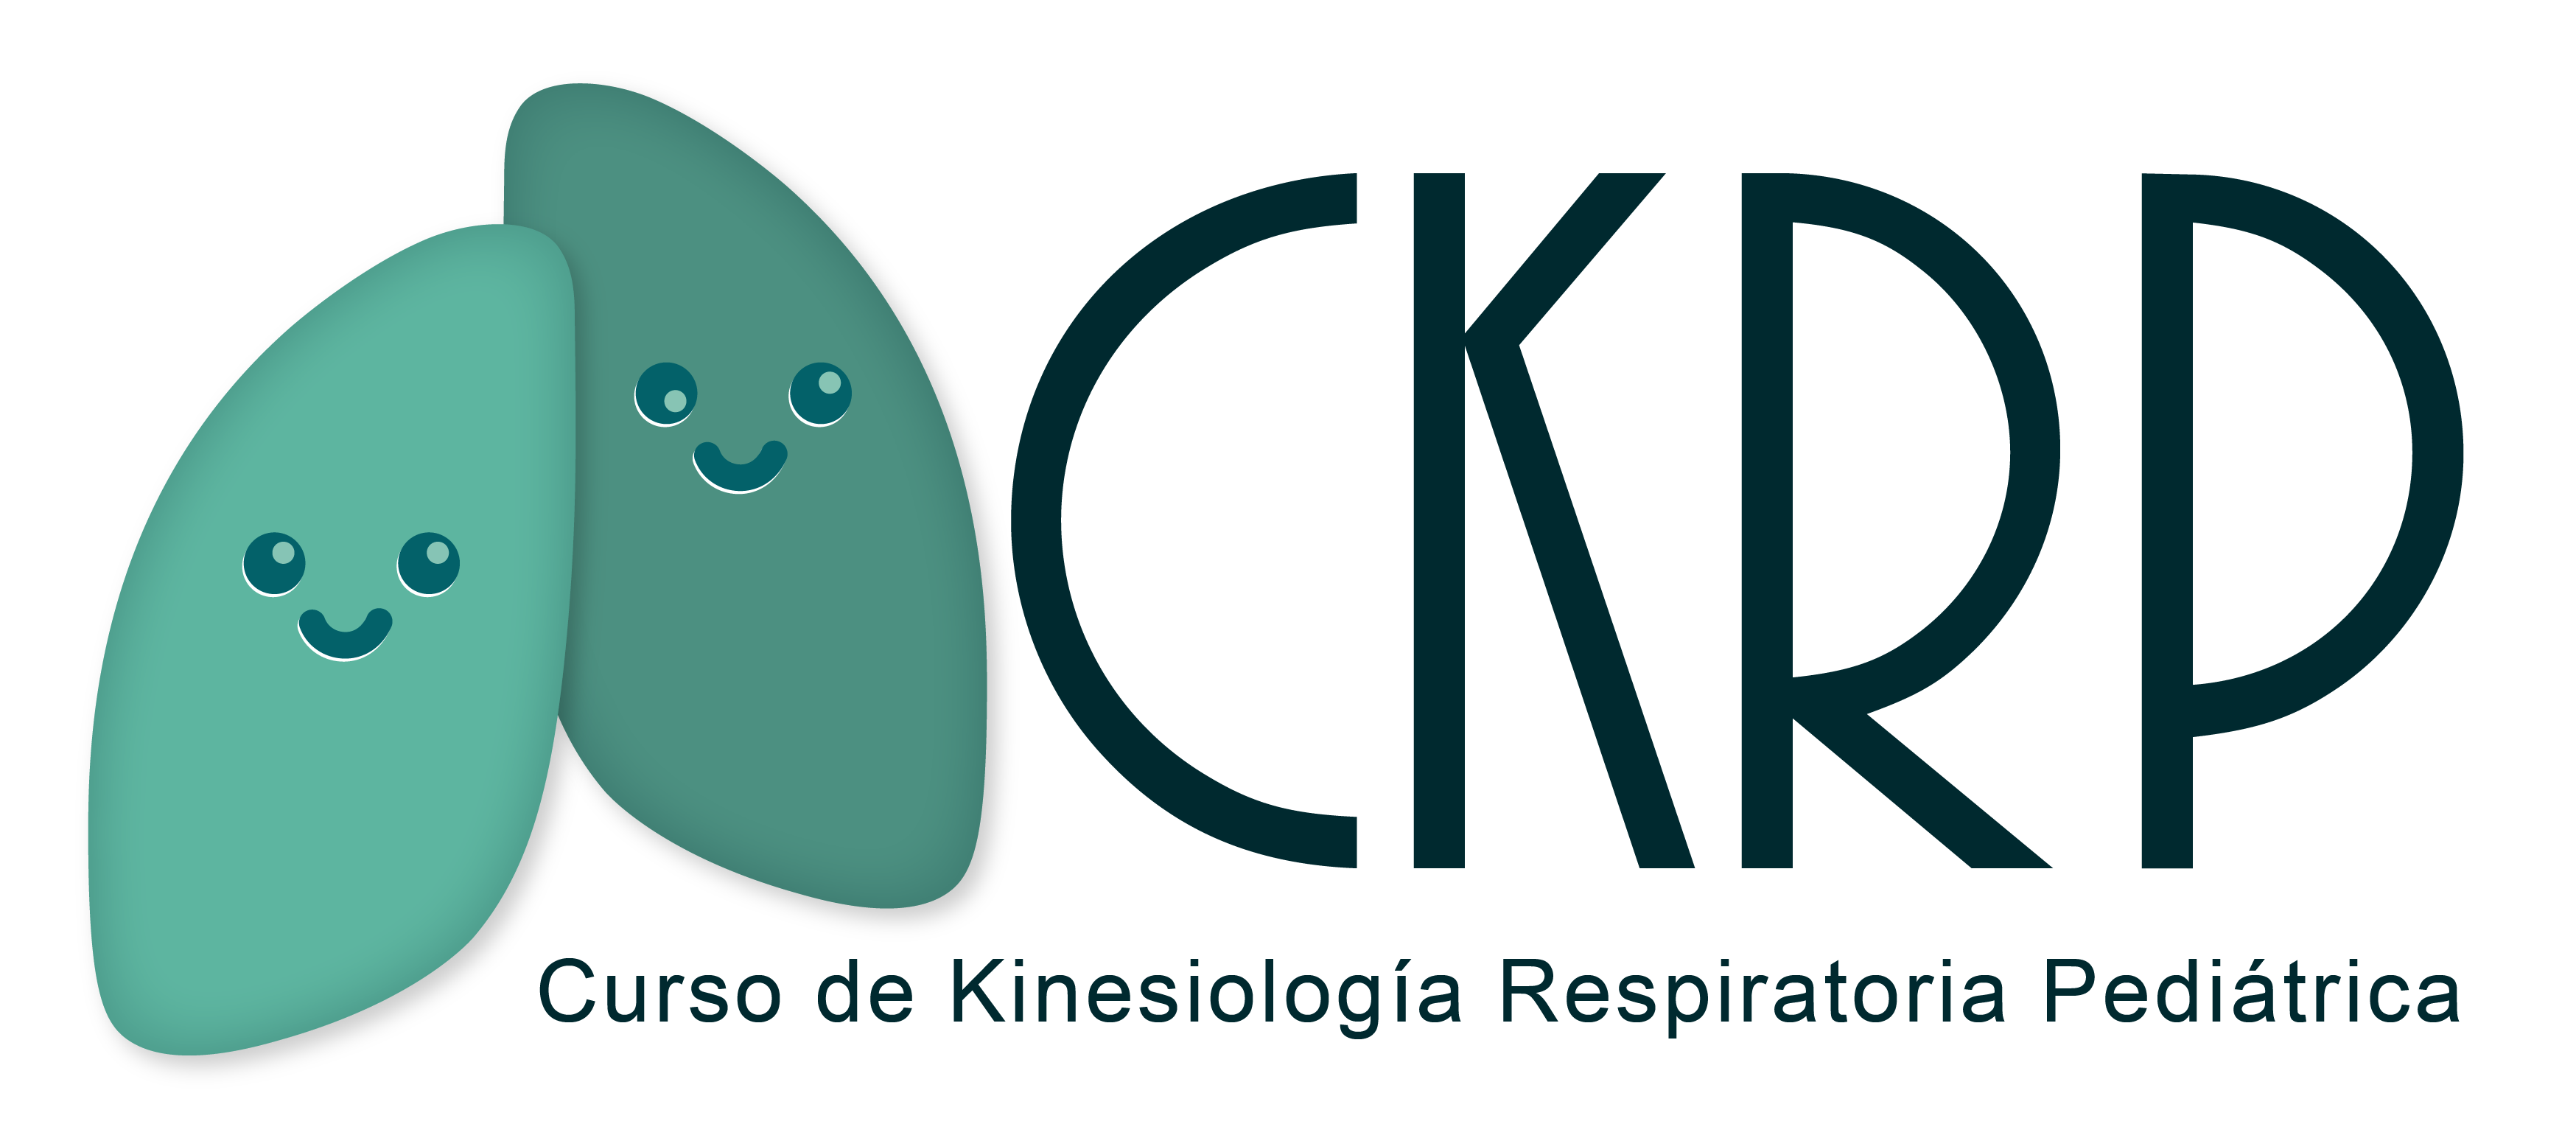 CKRP